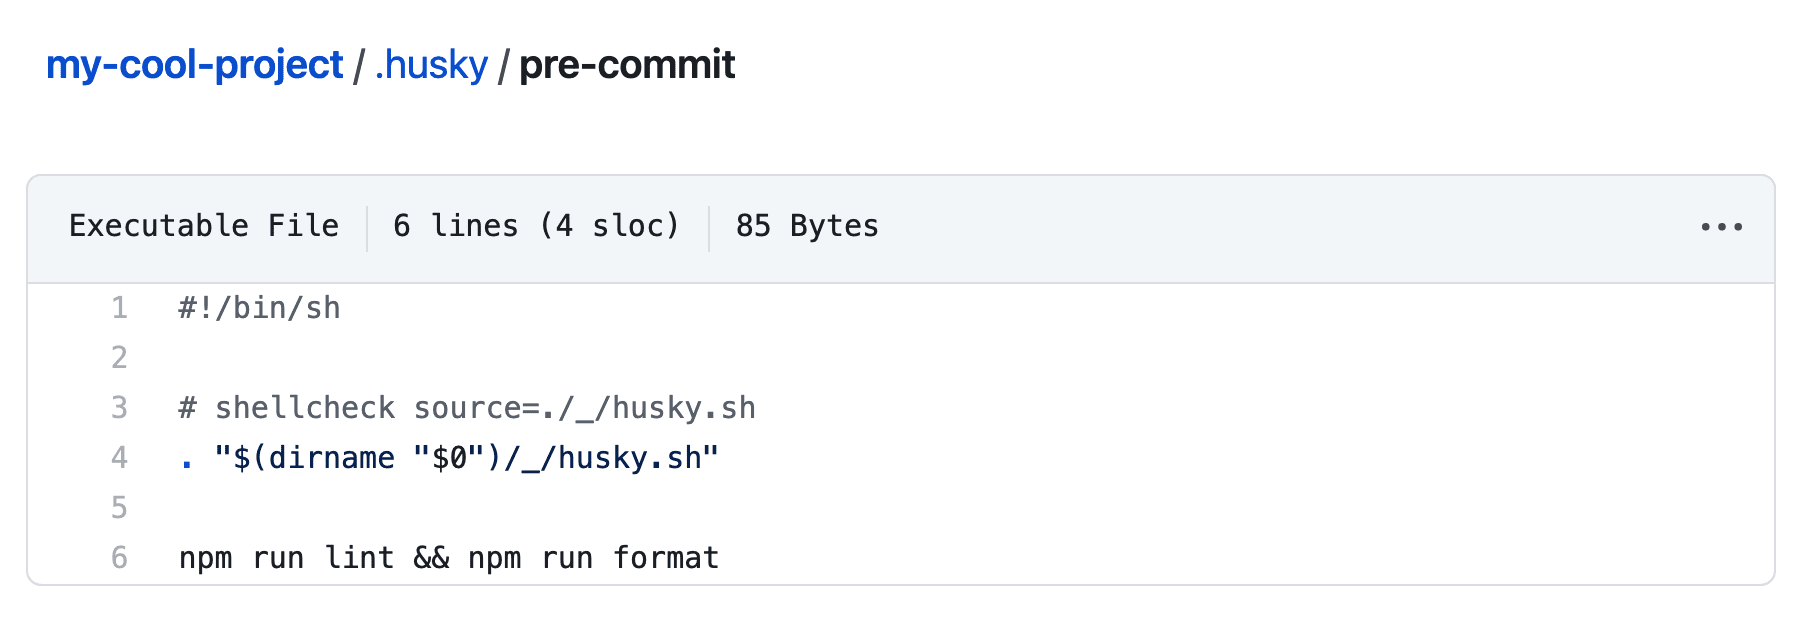 A new script that husky will tell Git to run any time the pre-commit hook runs. The Executable file includes 6 lines (4 sloc) and 85 bytes